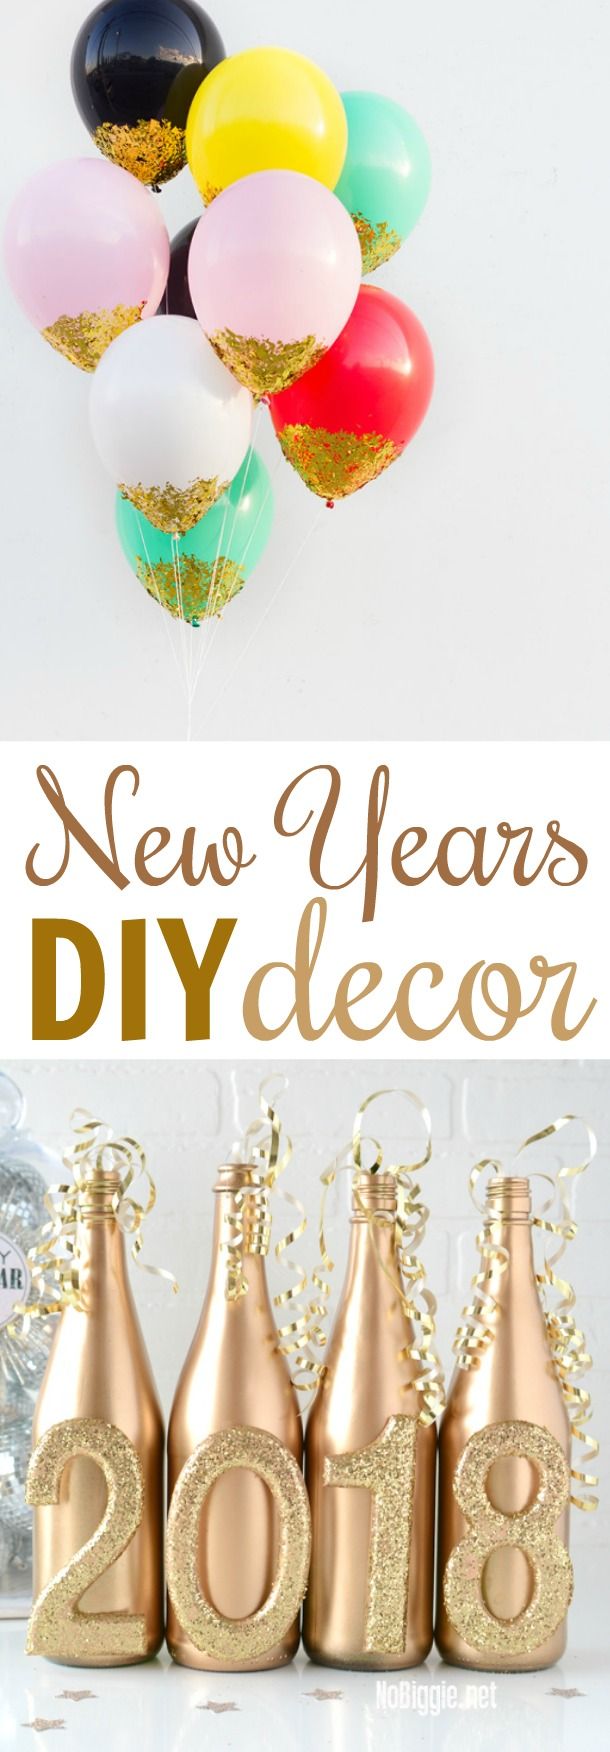 So today I rounded up some of my favorite New Years DIY Decor that you definite...